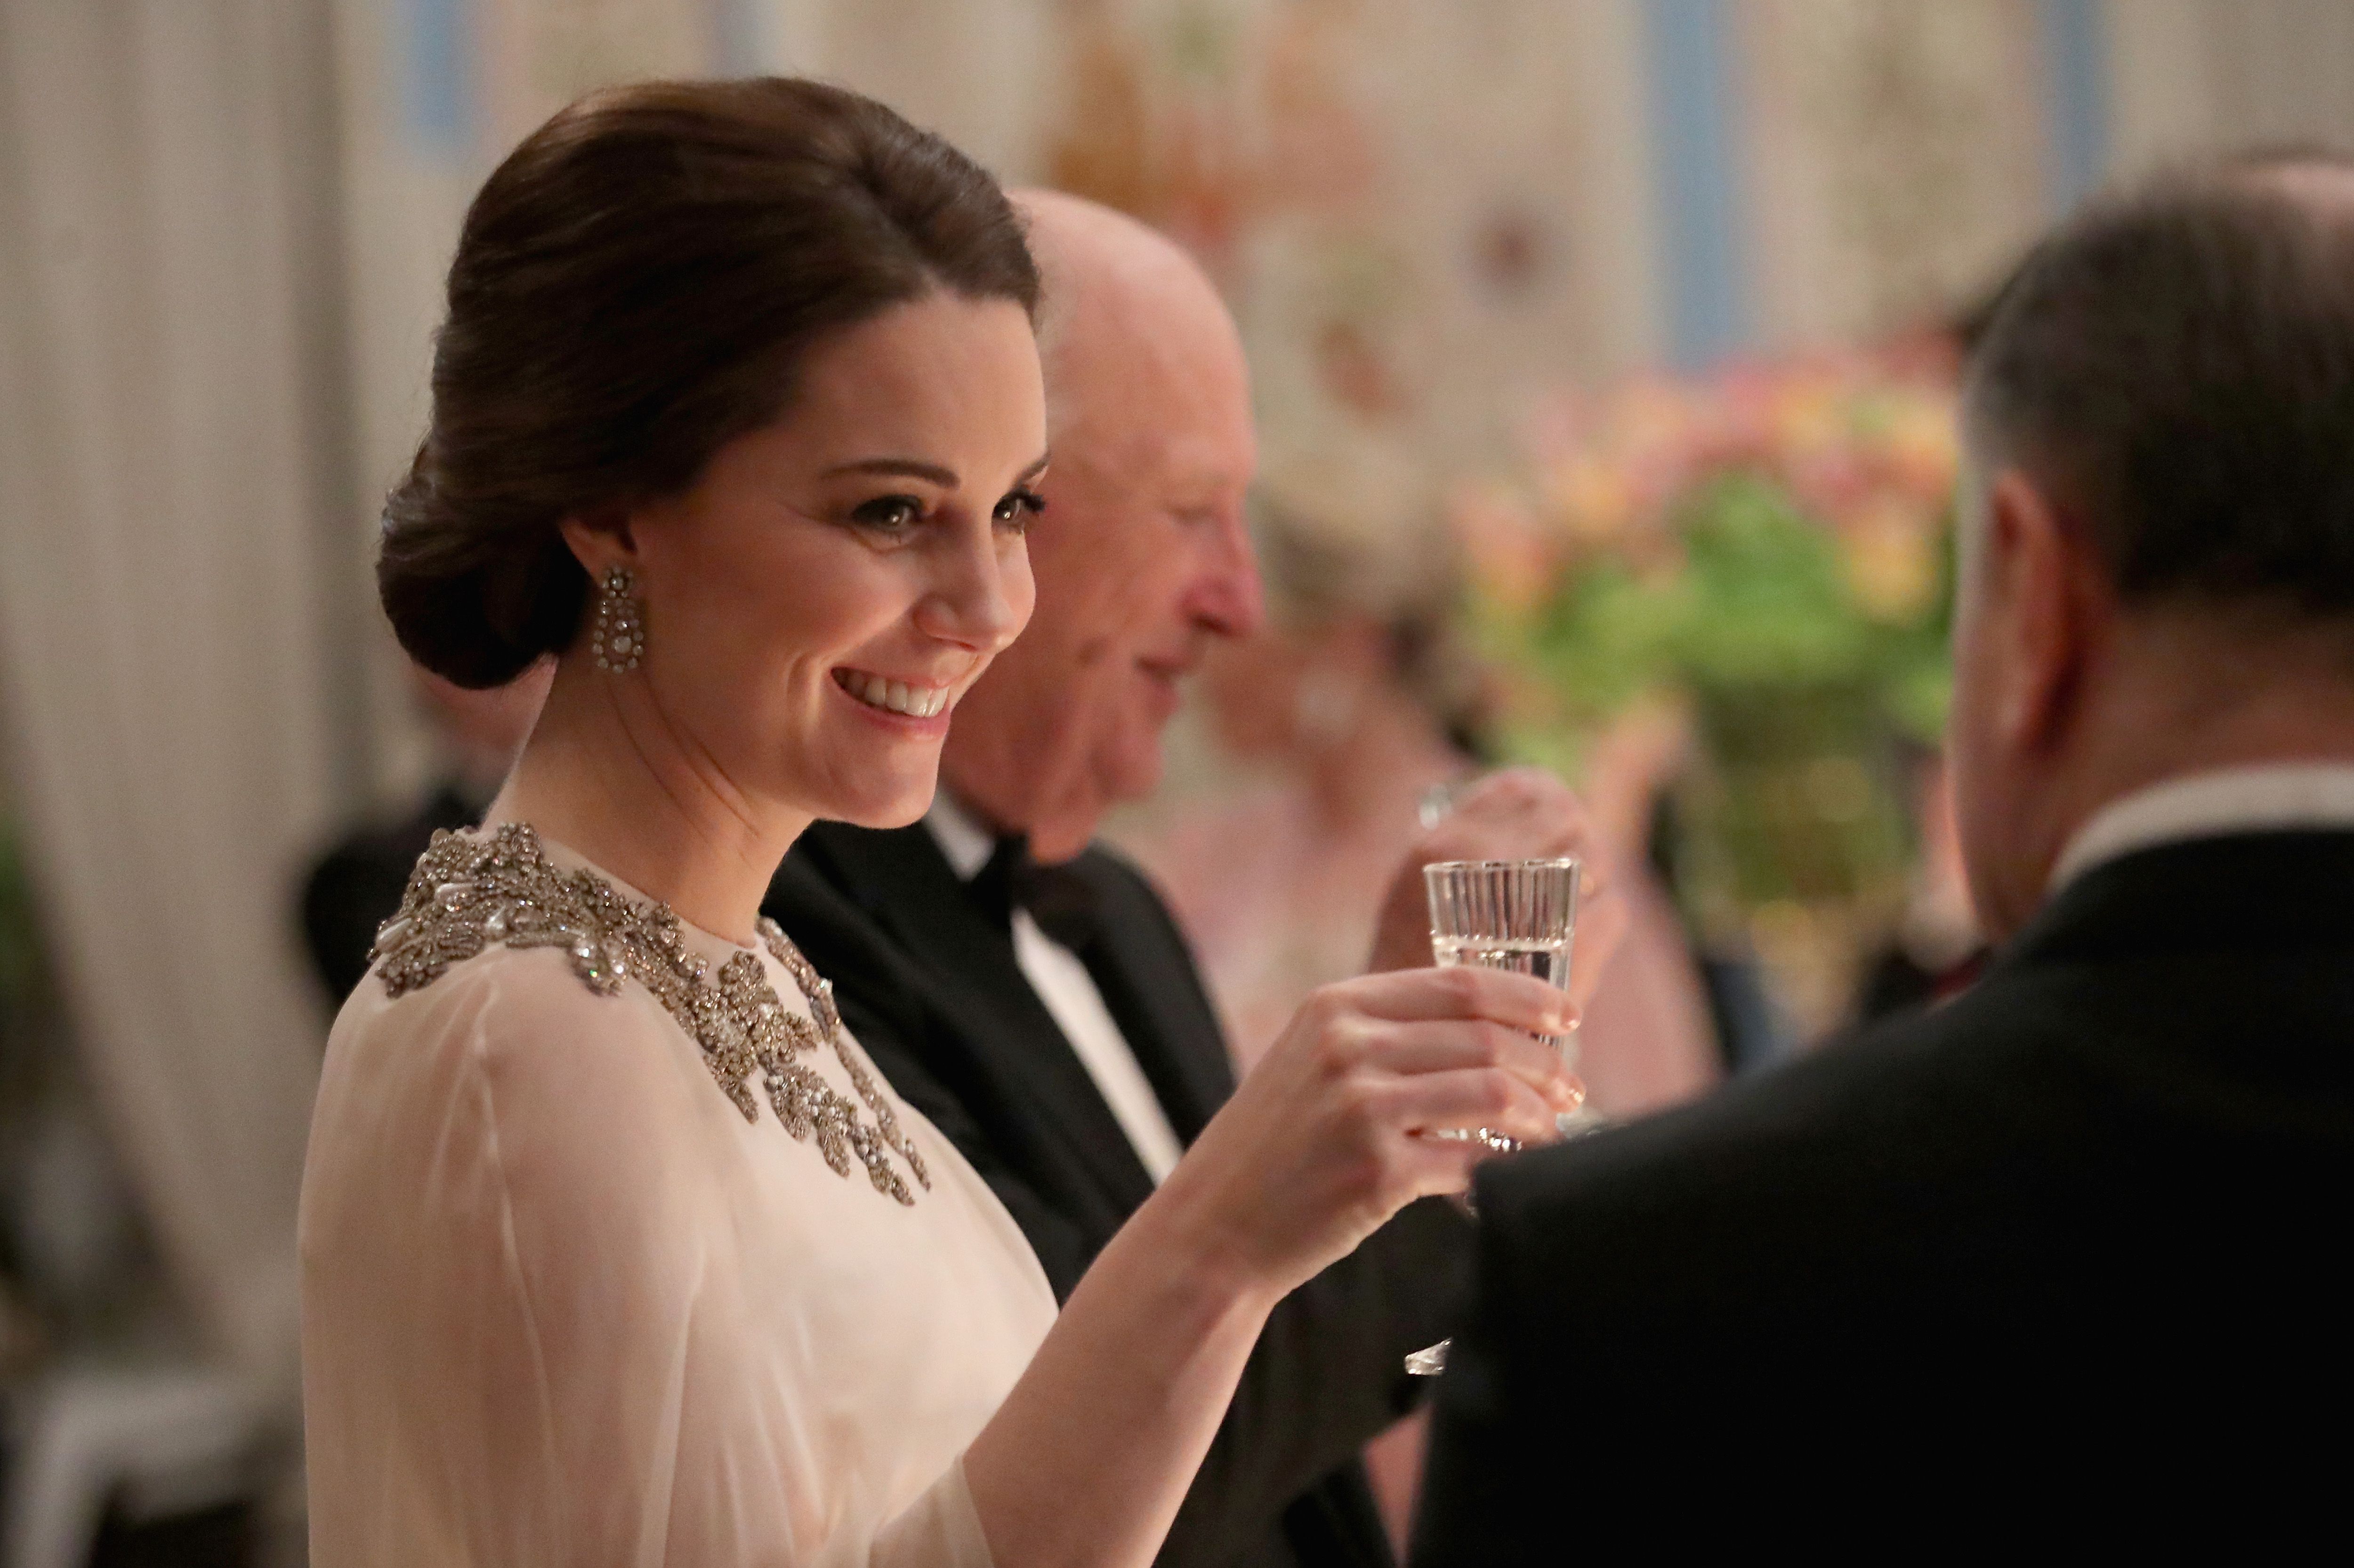 A Look at Kate Middleton's Daily Diet - What of Cambridge Eats Every Day